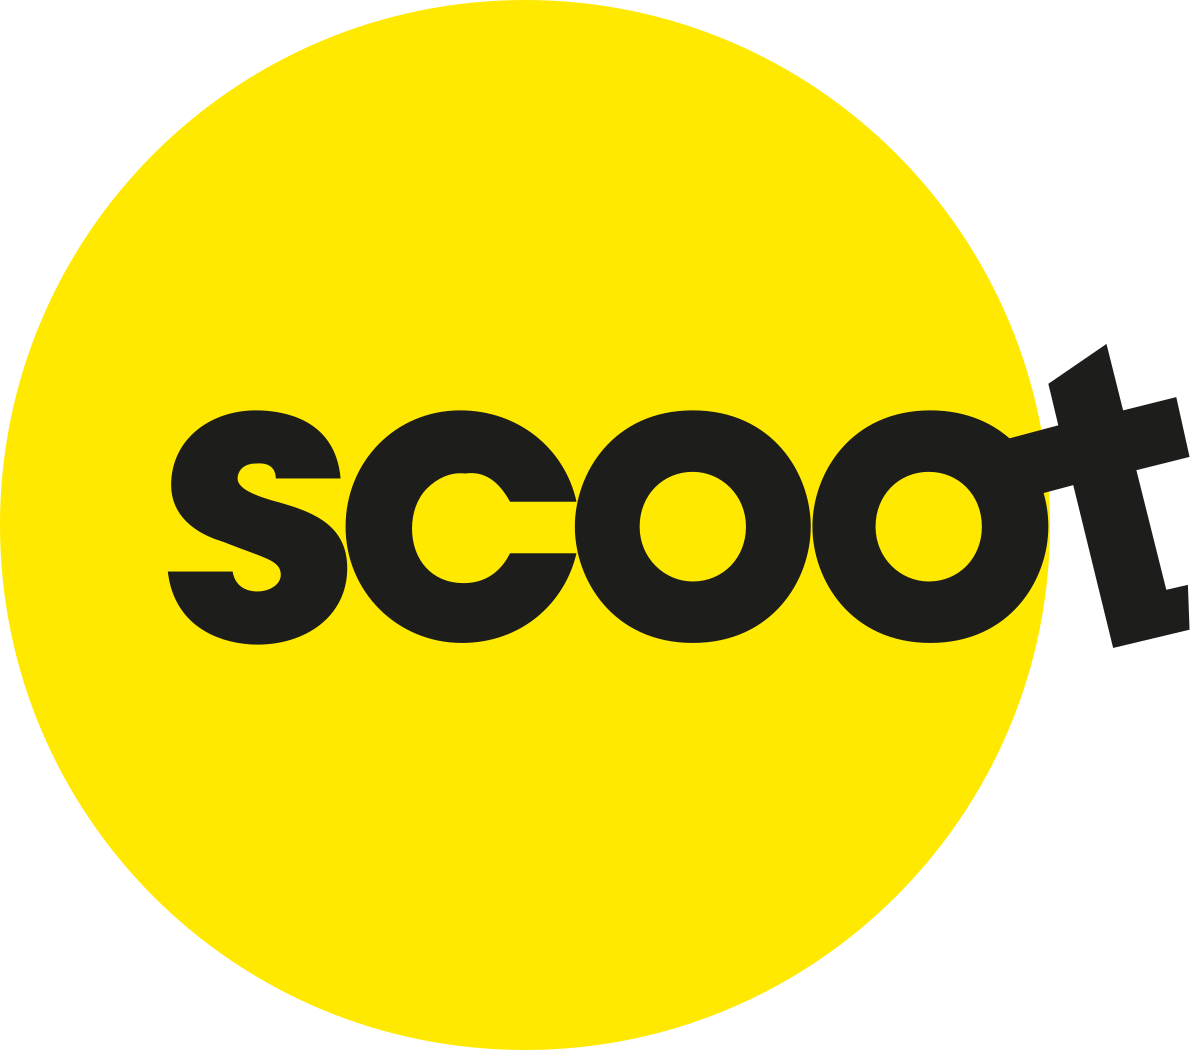 Yellow and Blue Airline Logo - Scoot